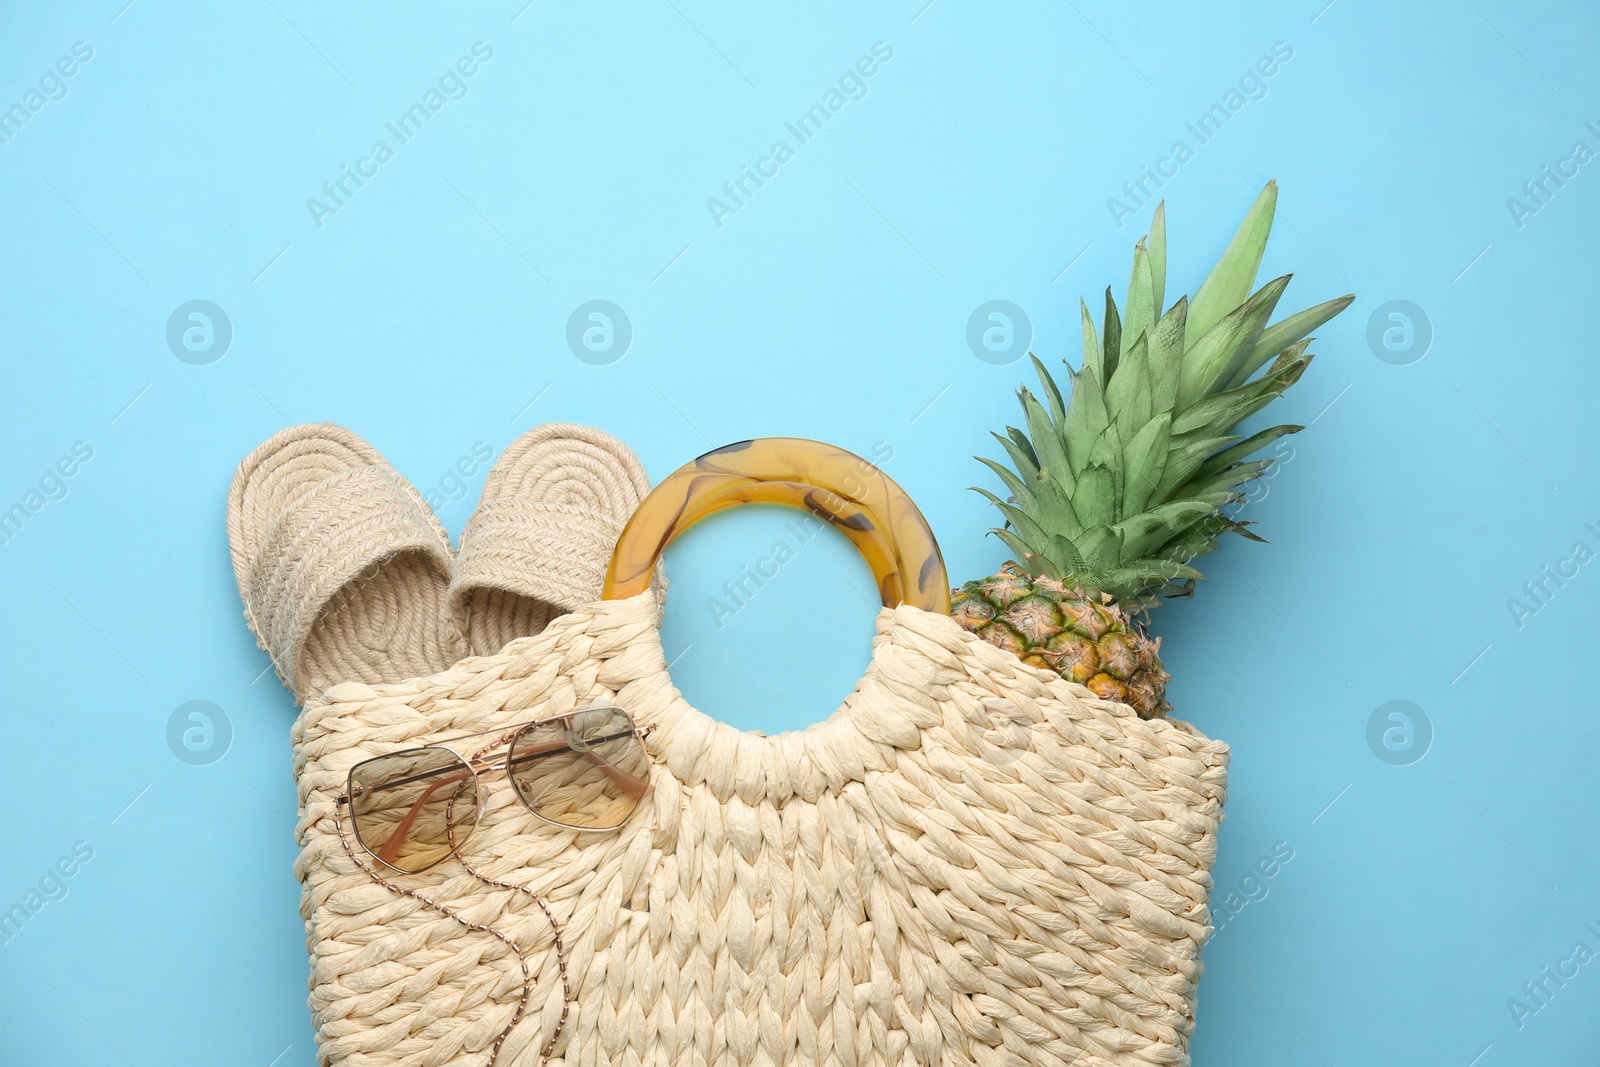 Photo of Elegant woman's straw bag with shoes, sunglasses and pineapple on light blue background, top view